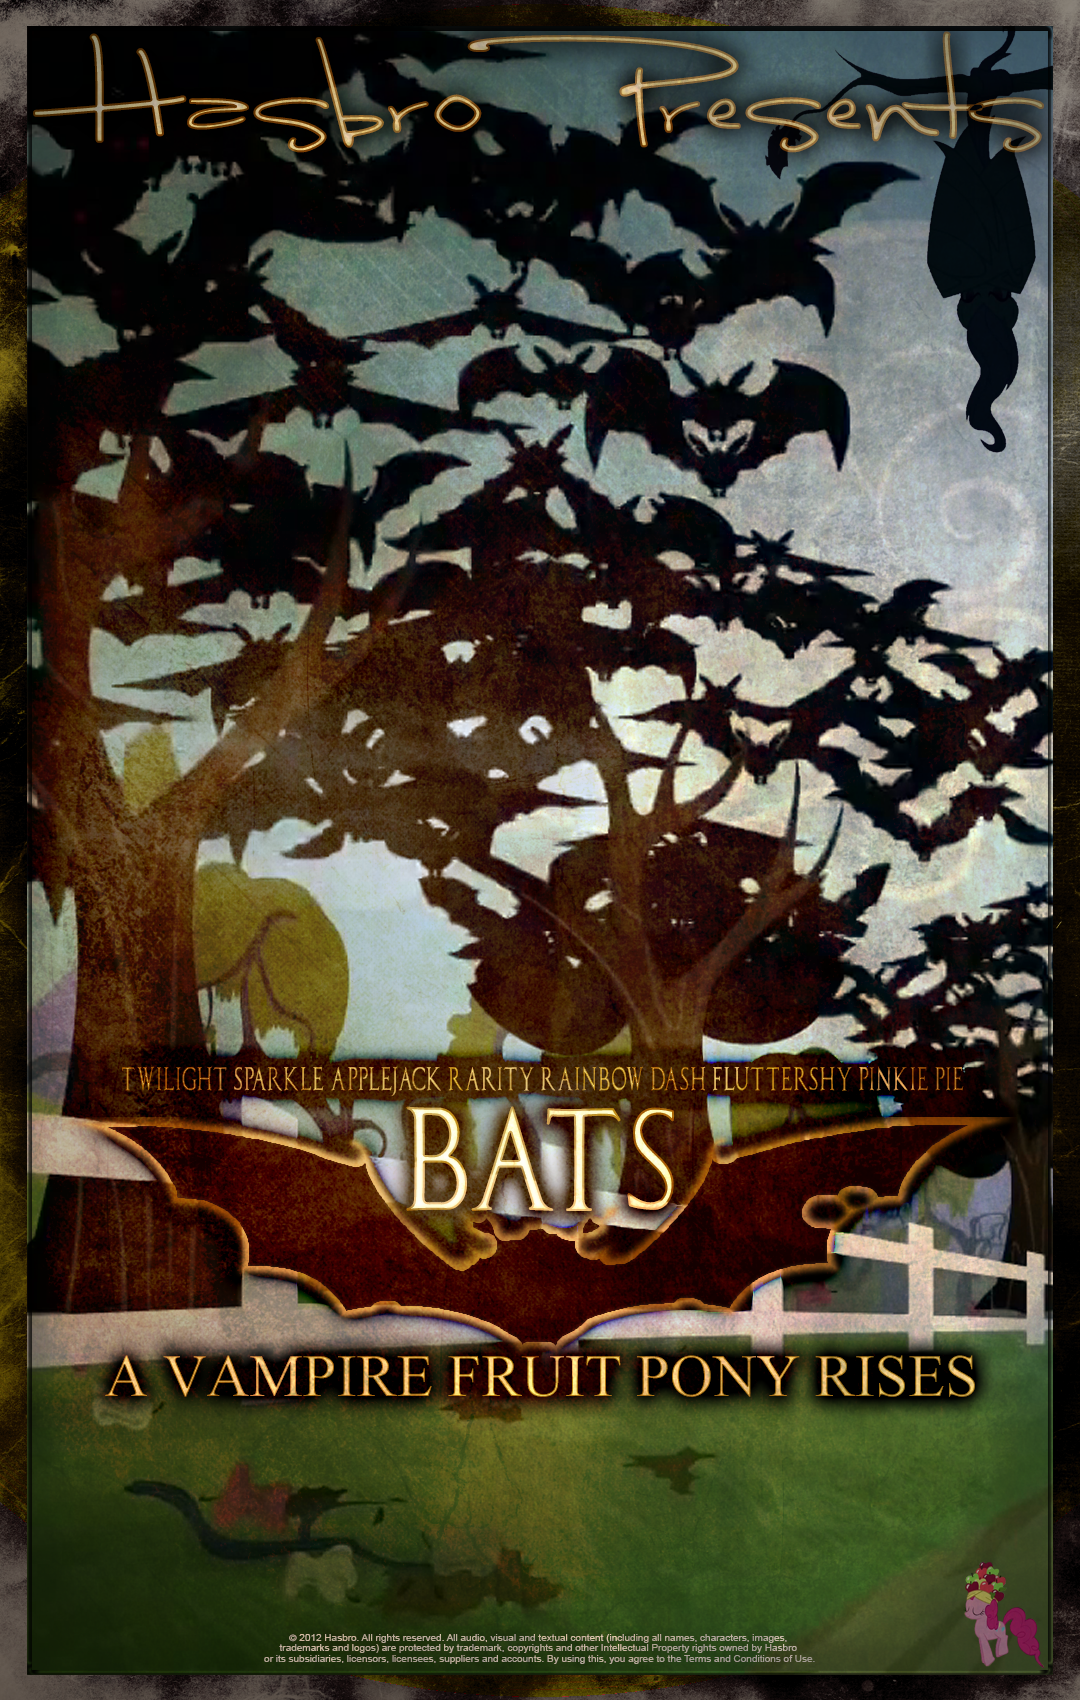 mlp___bats___movie_poster_by_pims1978-d6zs275.png